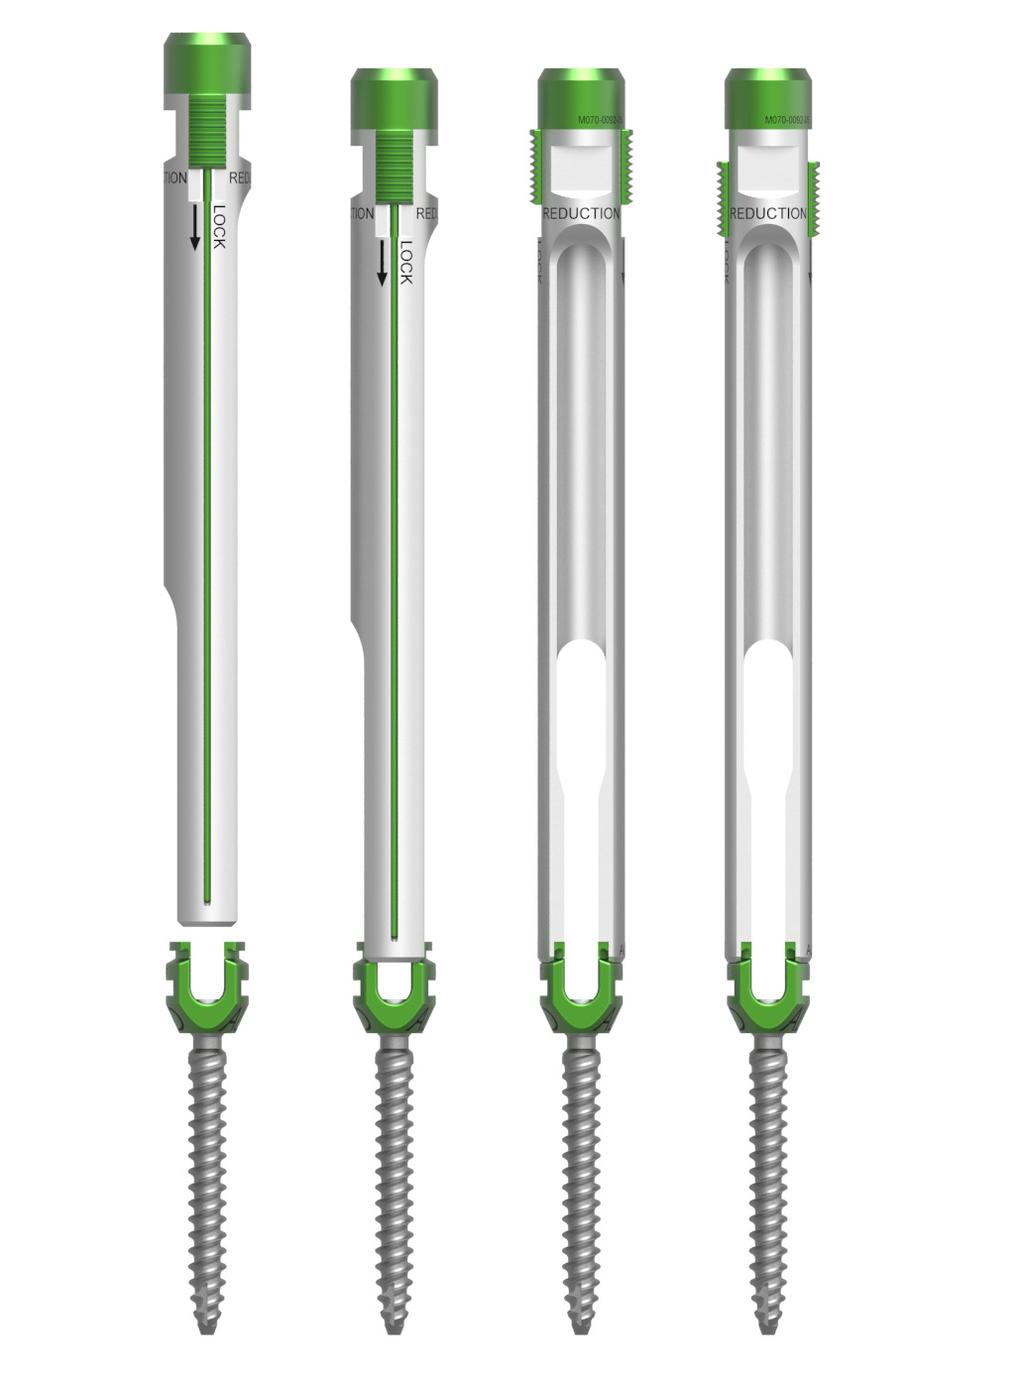 Rod reduction is described further in Step 11. To attach a screw extender to a pedicle screw: Select appropriate size pedicle screw.